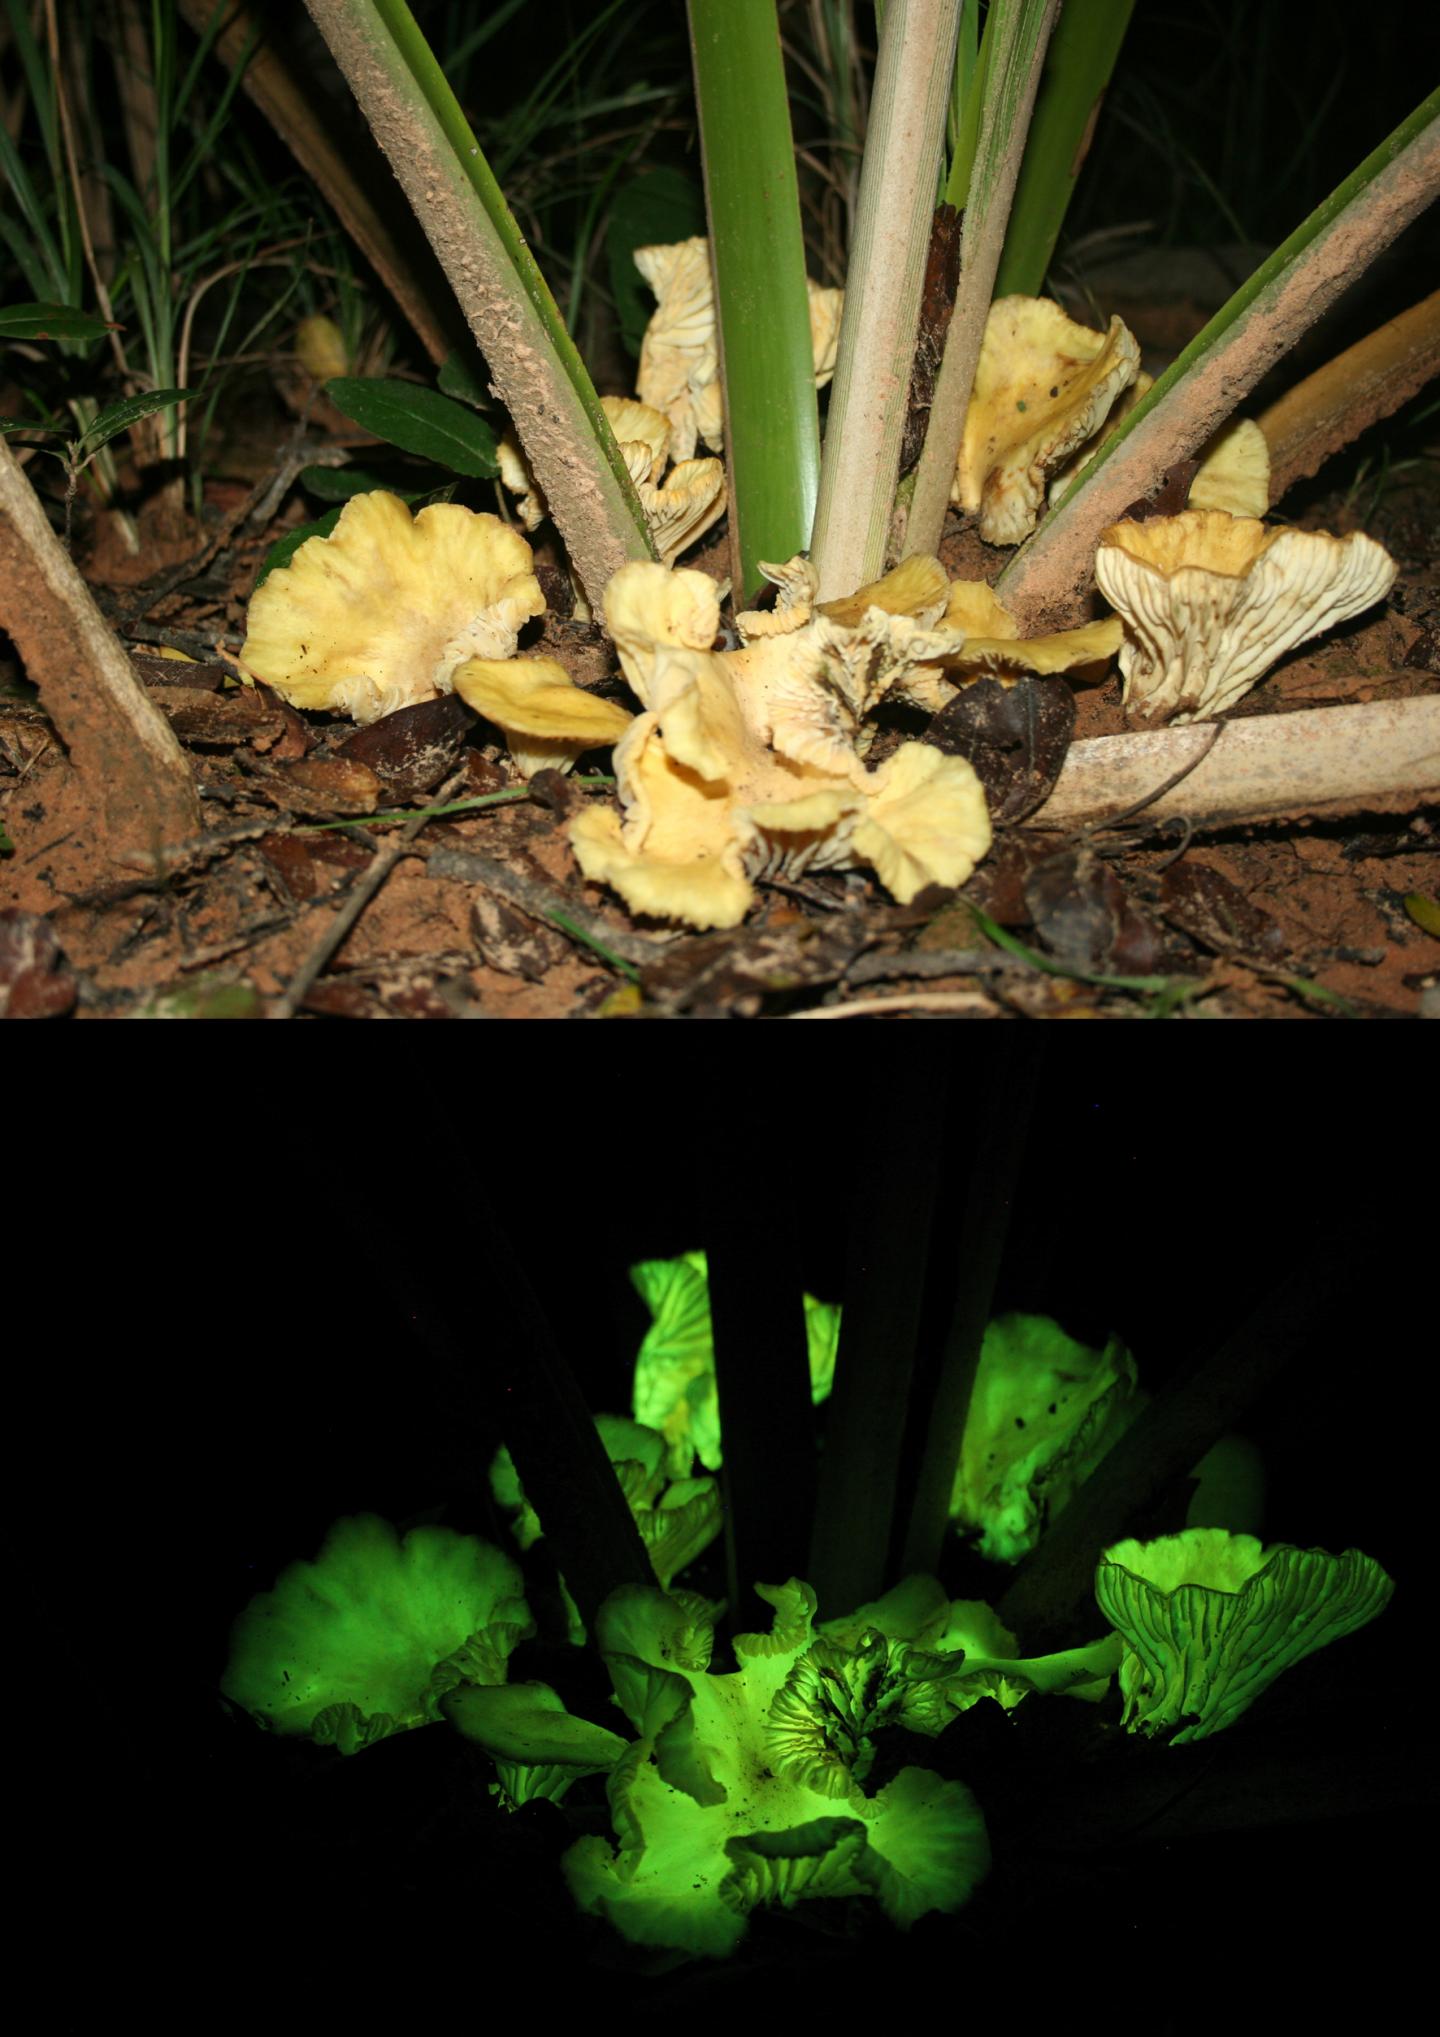 These are N. gardneri mushrooms growing on the base of a young babassu palm in Gilbués, PI, Brazil. Photo credit: Michele P. Verderane/IP-USP-2008